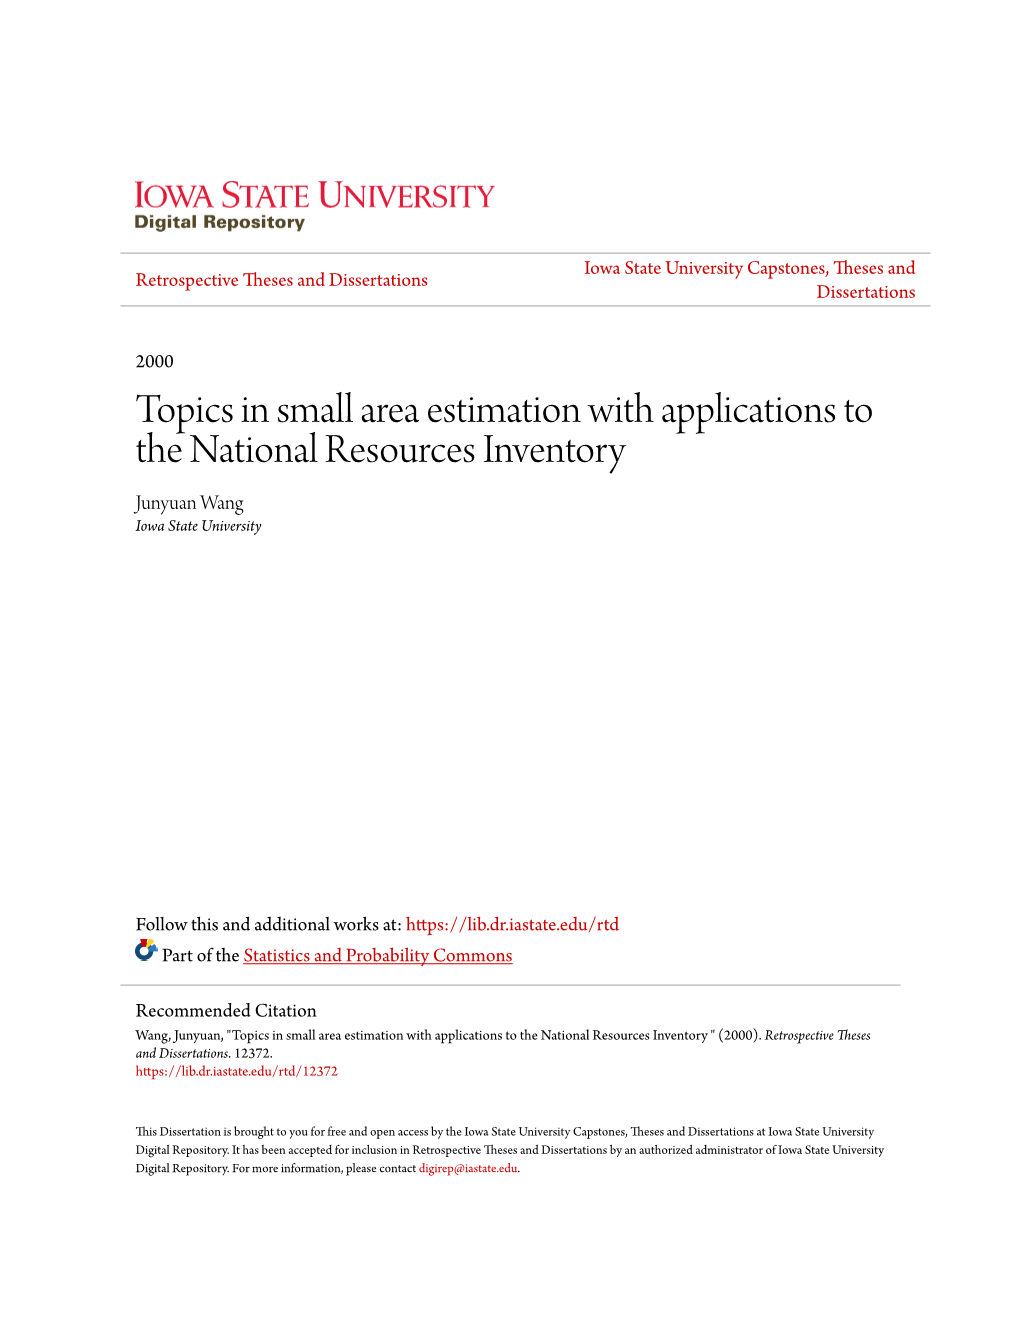 Topics in Small Area Estimation with Applications to the National Resources Inventory Junyuan Wang Iowa State University